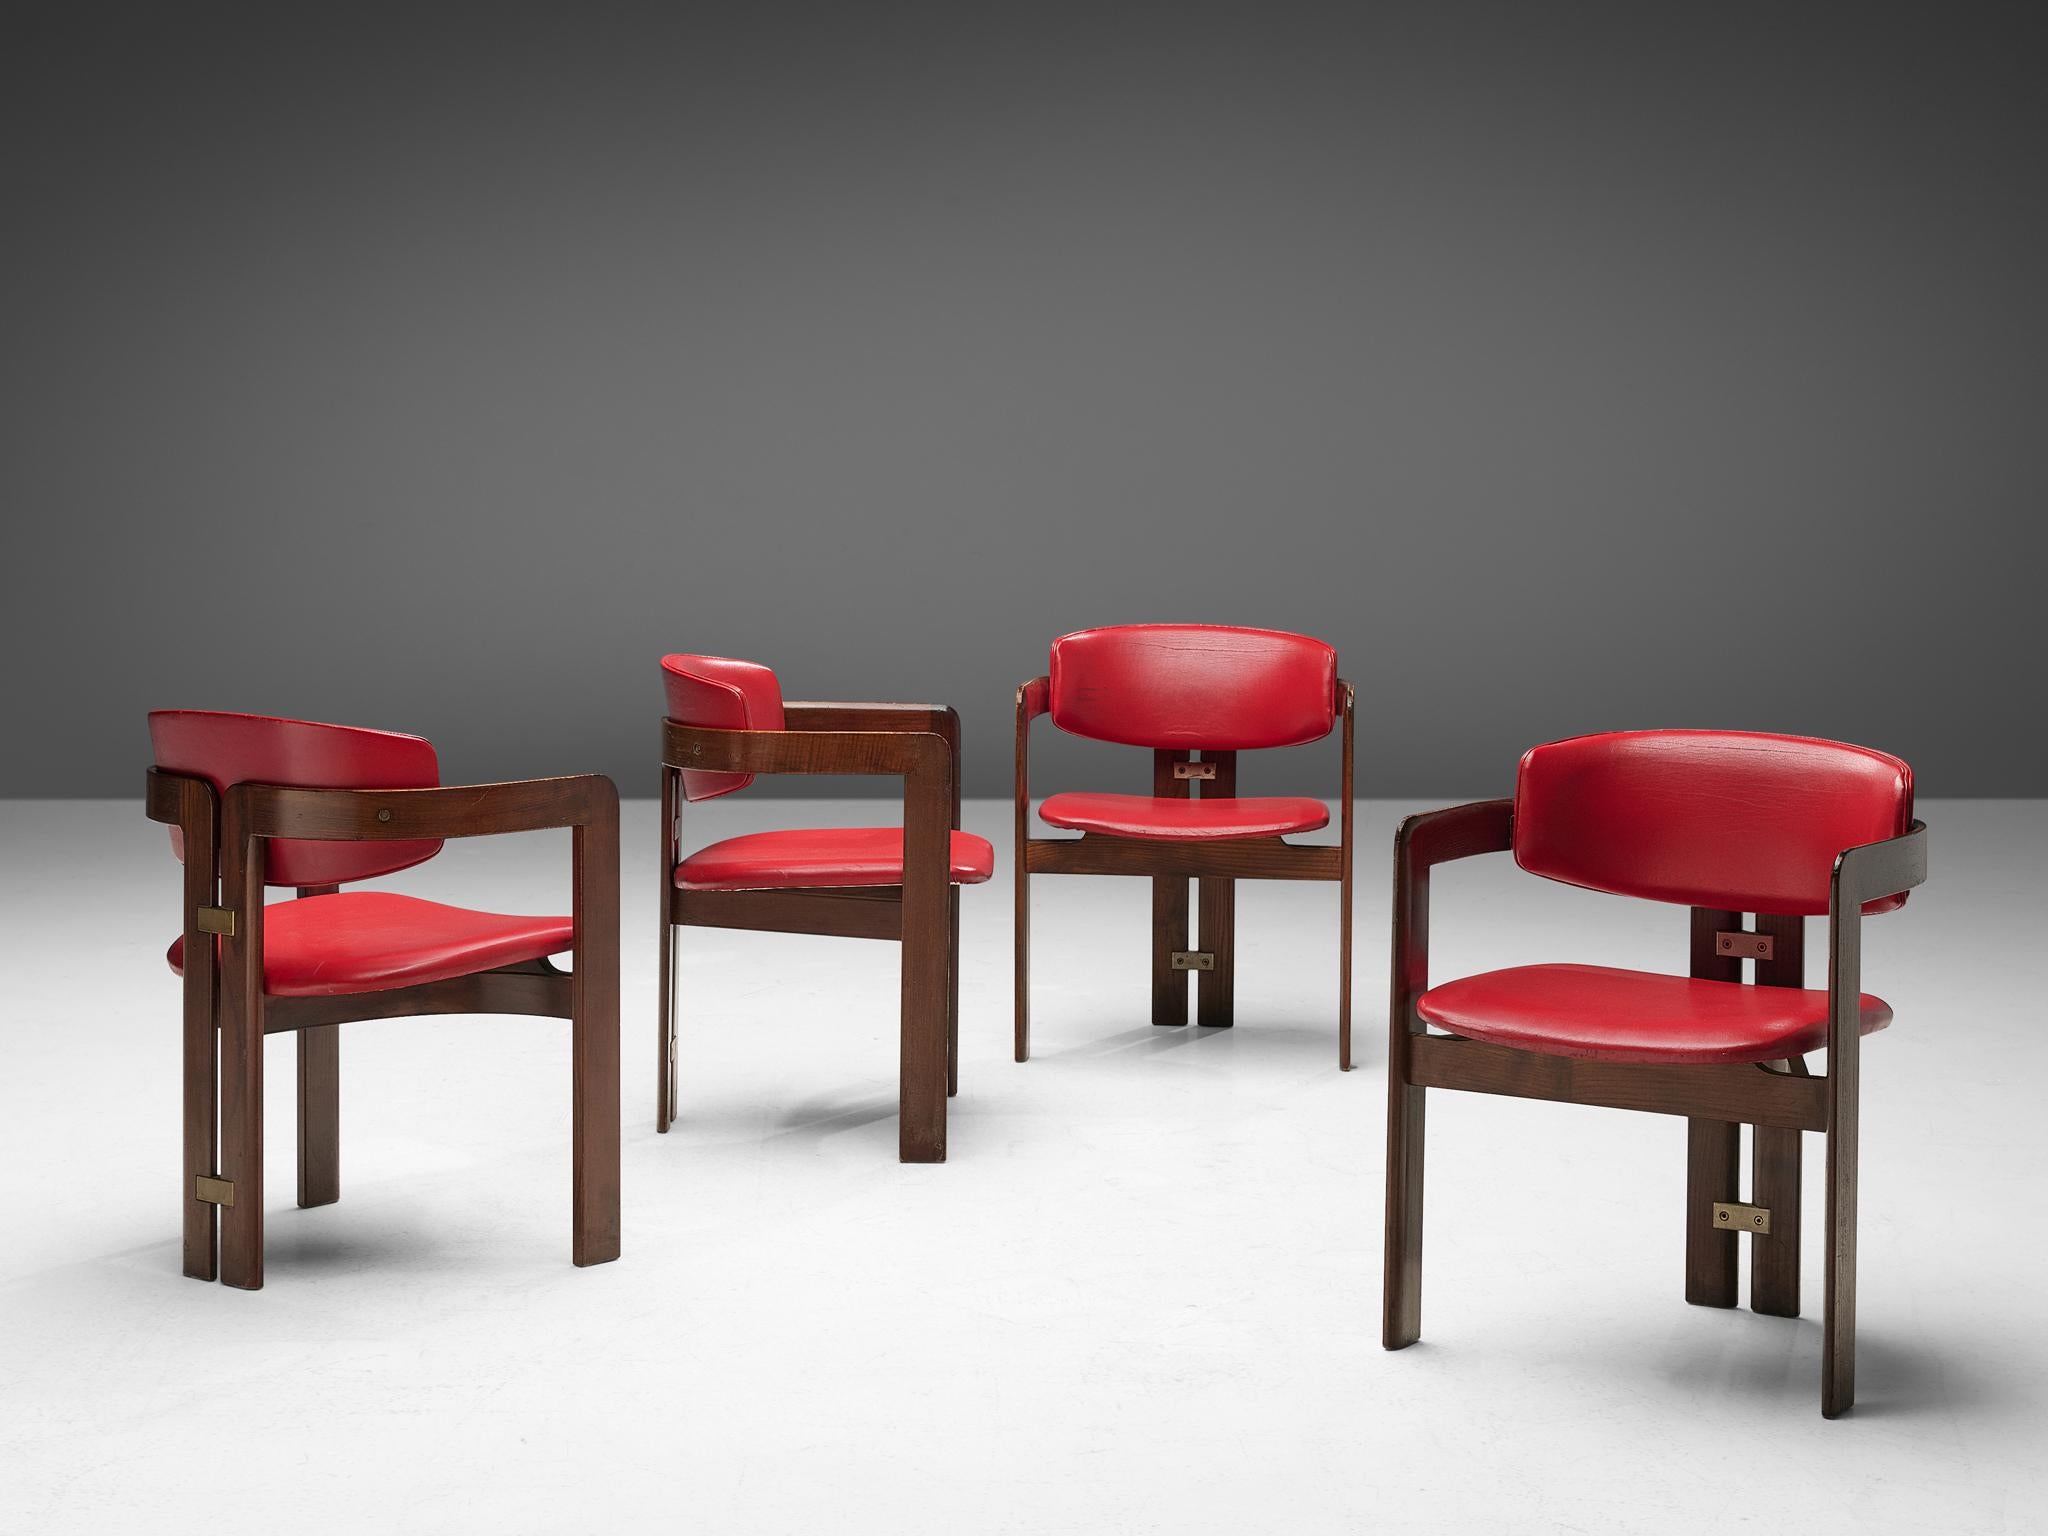 Augusto Savini, set of four 'Pamplona' dining room chairs for Pozzi, in ash and red leather, Italy, 1965. 

Set of four armchairs in rosewood and red leather upholstery. A characteristic design, simplistic yet very strong in lines and proportions.